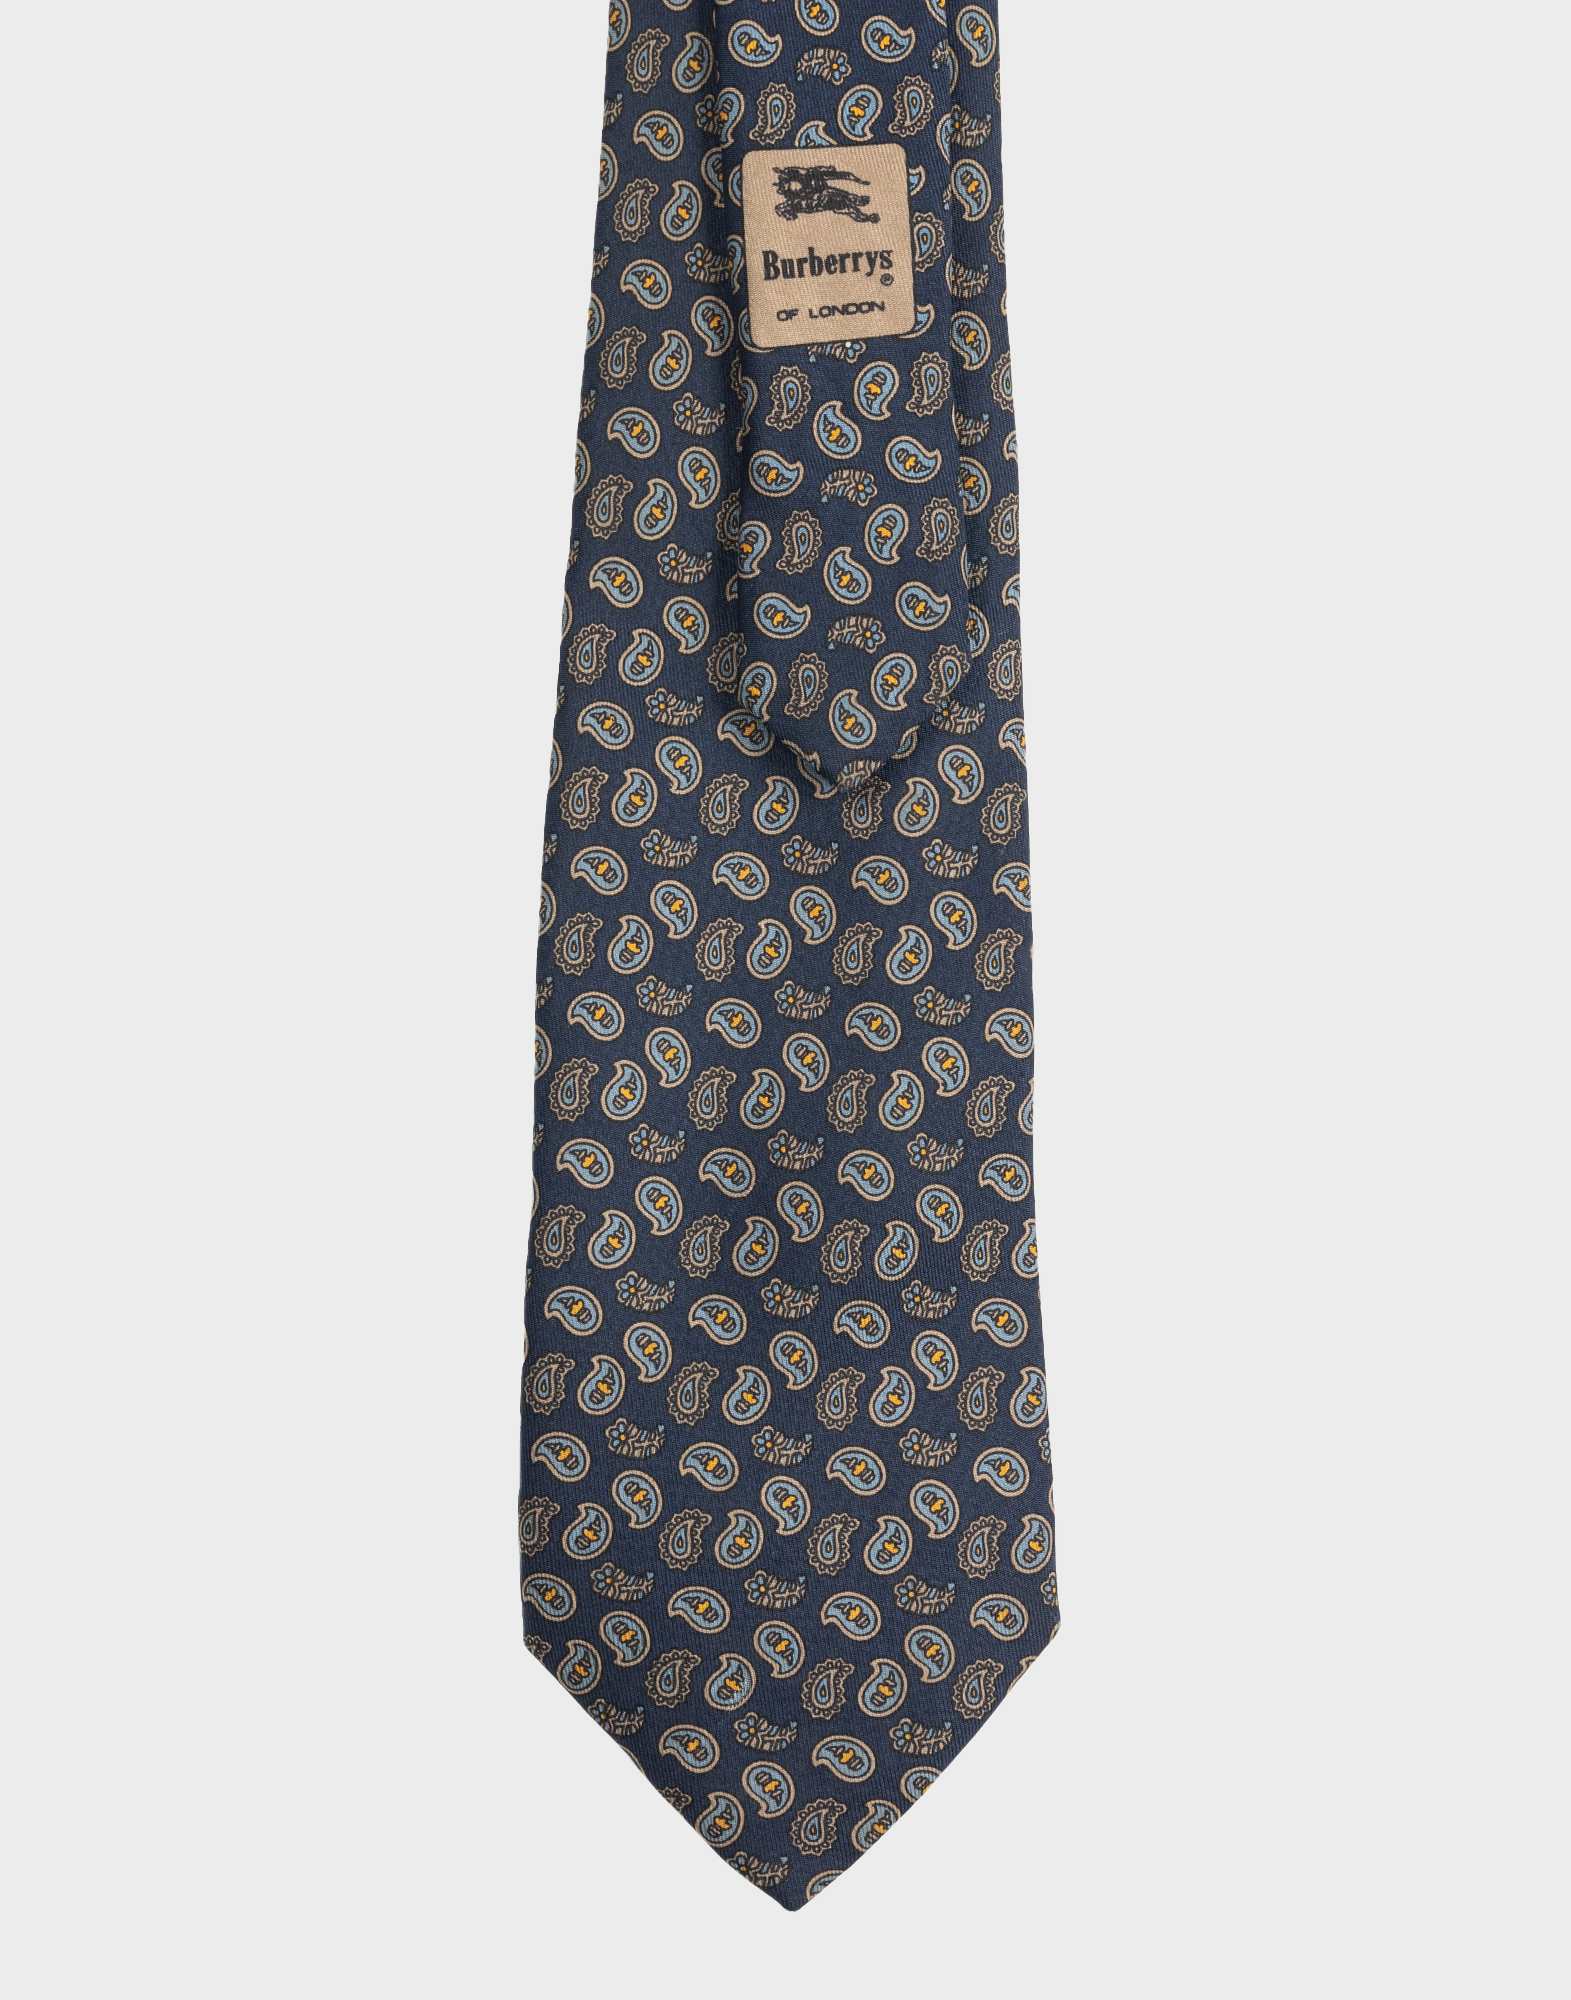 Burberrys blue silk tie from the 1990s with blue and yellow paisley pattern